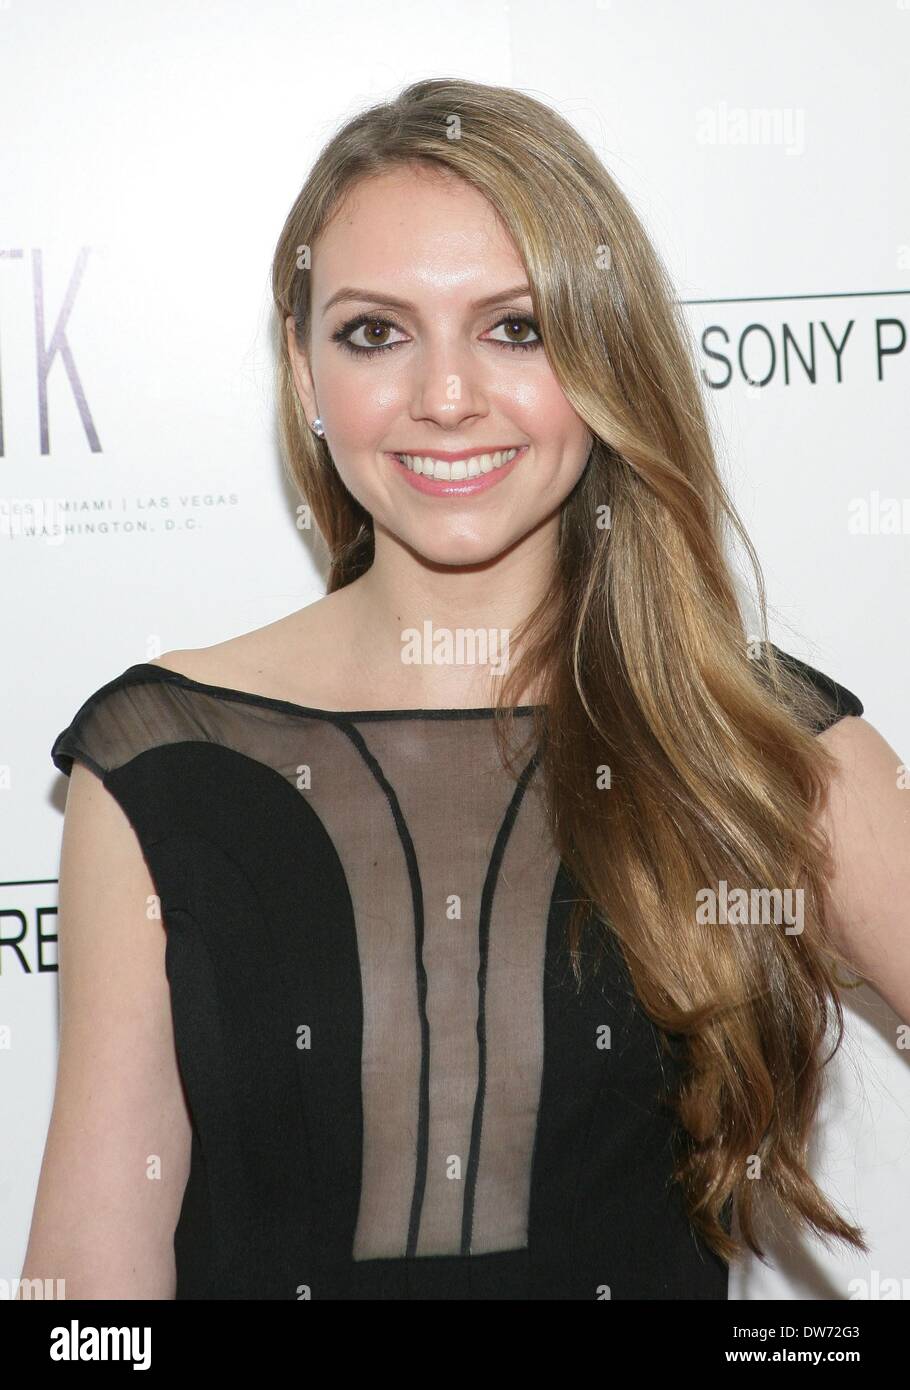 Los Angeles, USA. 1st March 2014. Olivia Somerlyn at arrivals for Sony Pictures Classics (SPC) Pre-Oscars Dinner, STK Restaurant, Los Angeles, CA March 1, 2014. Credit:  Everett Collection Inc/Alamy Live News Stock Photo